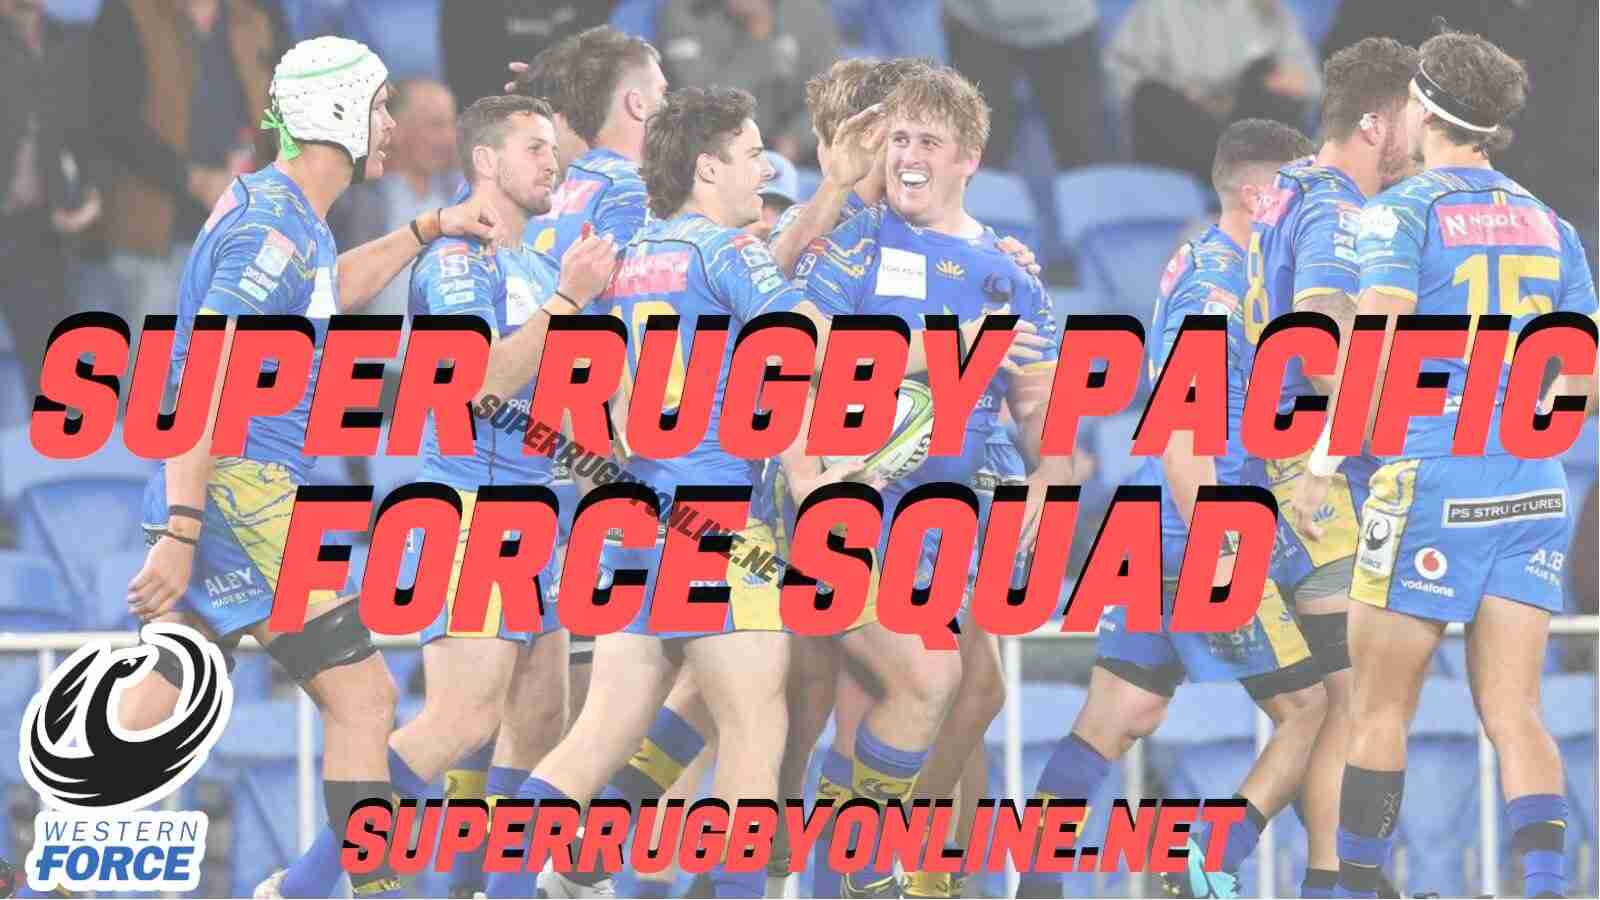 western-force-squad-super-rugby-pacific